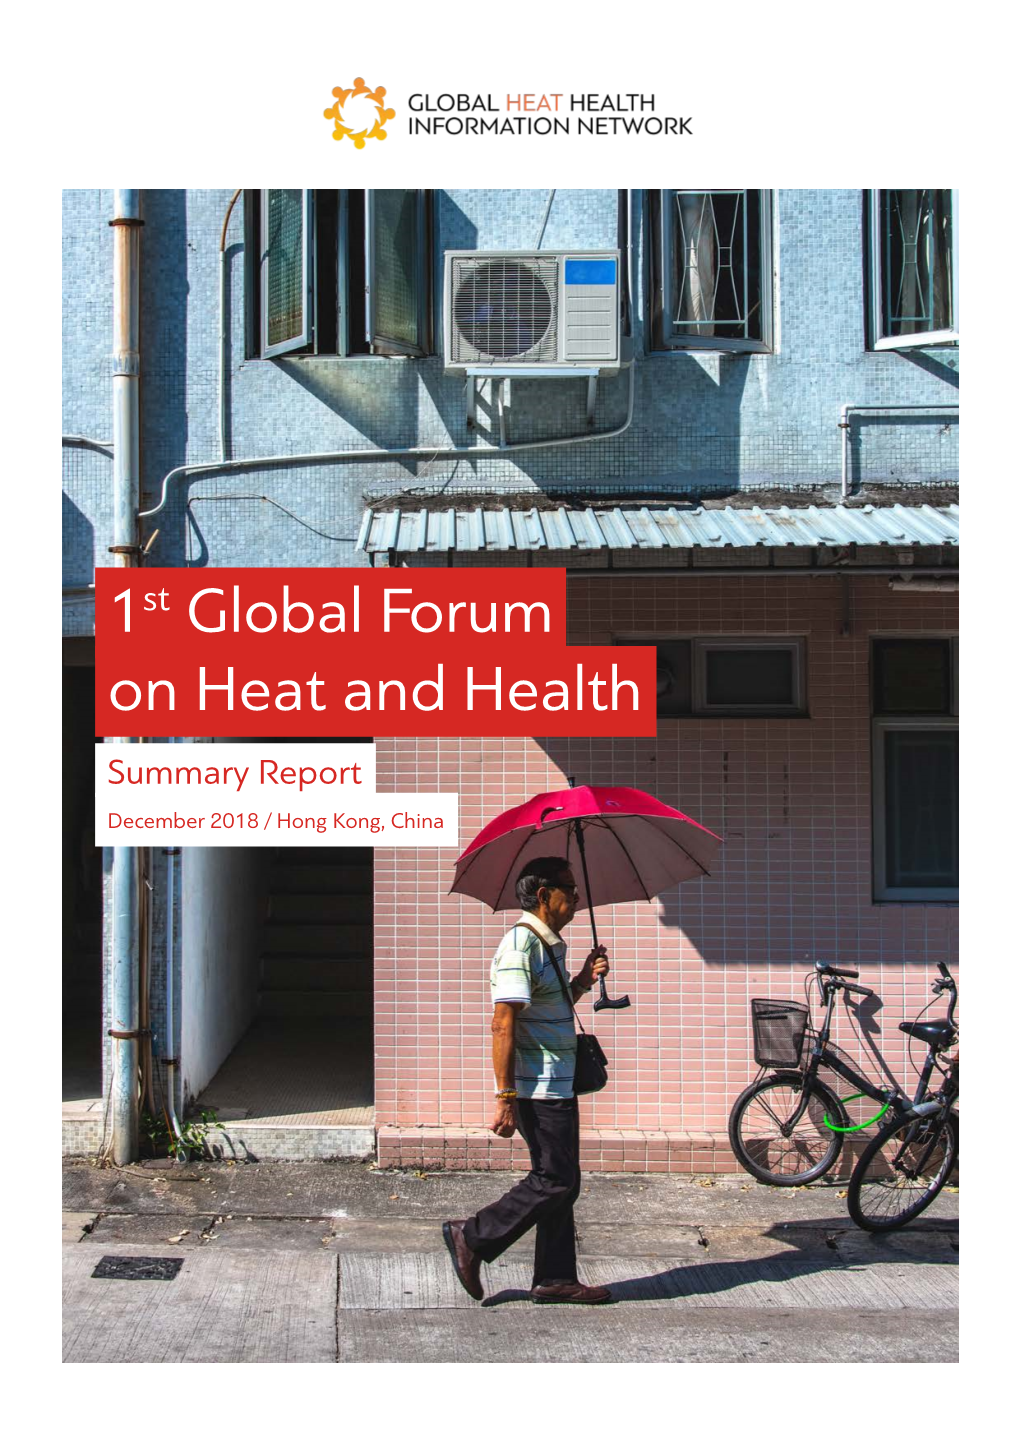 1St Global Forum on Heat and Health Summary Report December 2018 / Hong Kong, China About the Global Heat Health Information Network (GHHIN)